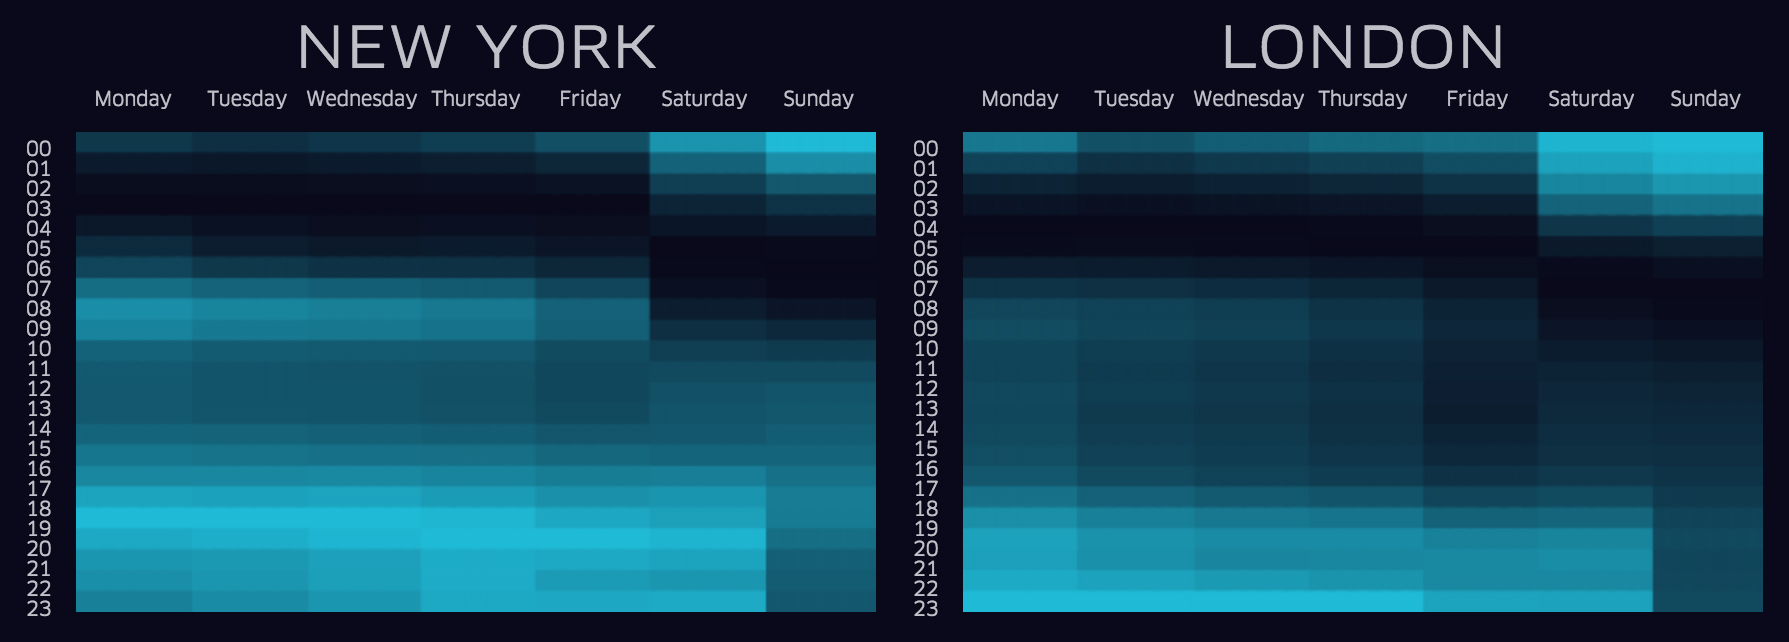 When Uber trips occur throughout the week in New York City and London. The brightness levels per hour and day are compared to the city itself. All times are standardized to the local time zone and expressed in military time (i.e. 20 is 20:00, or 8 pm).